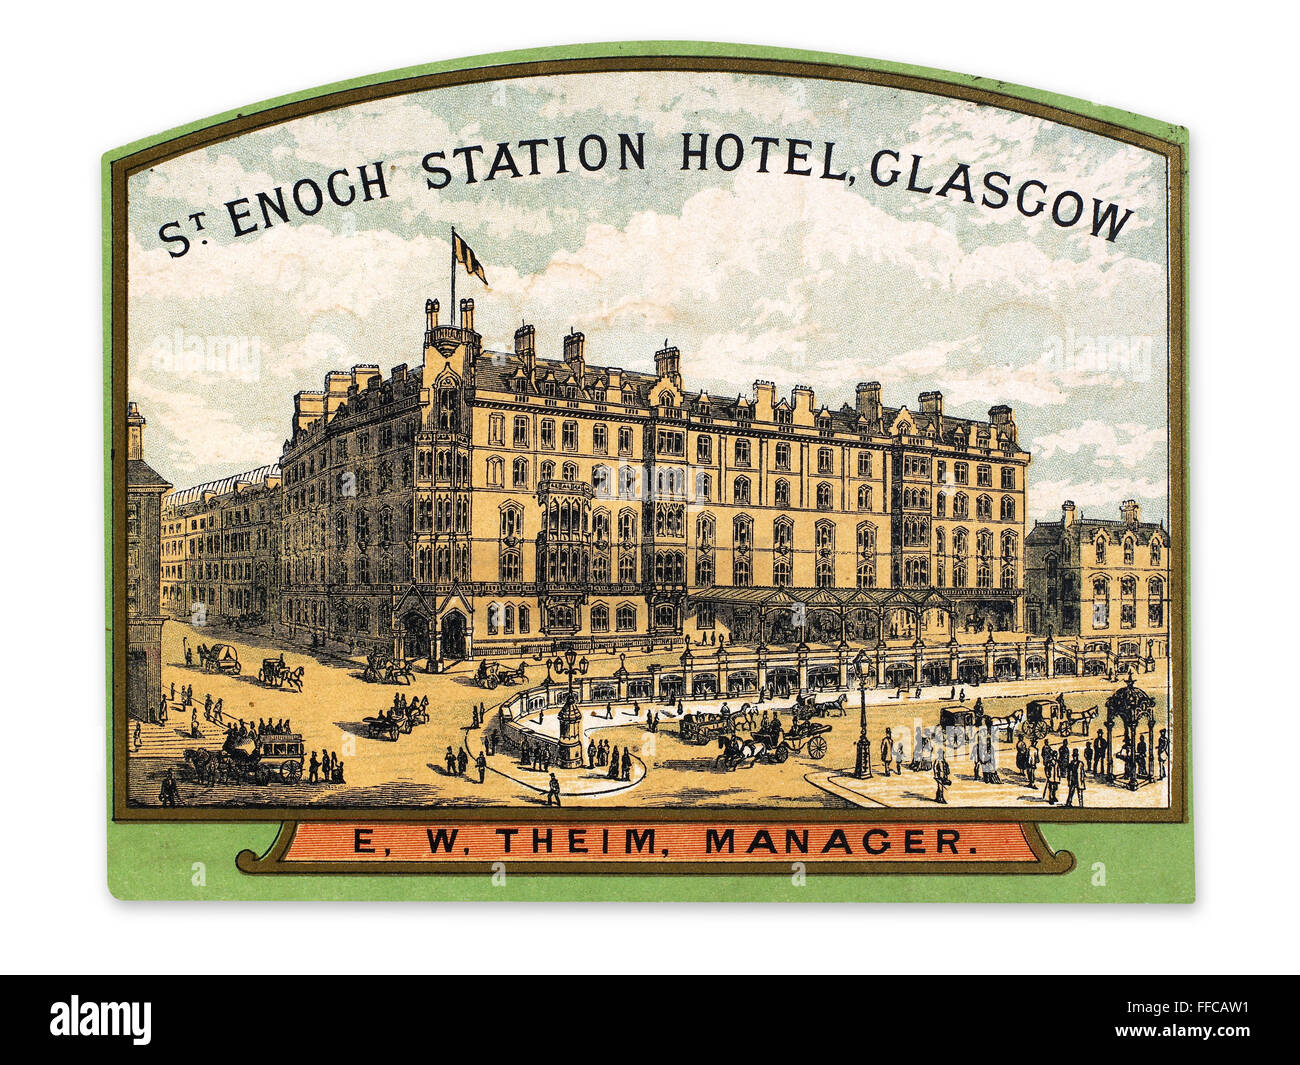 LUGGAGE LABEL. /nLuggage label from the St. Enoch Station Hotel in Glasgow, Scotland. Early 20th century. Stock Photo